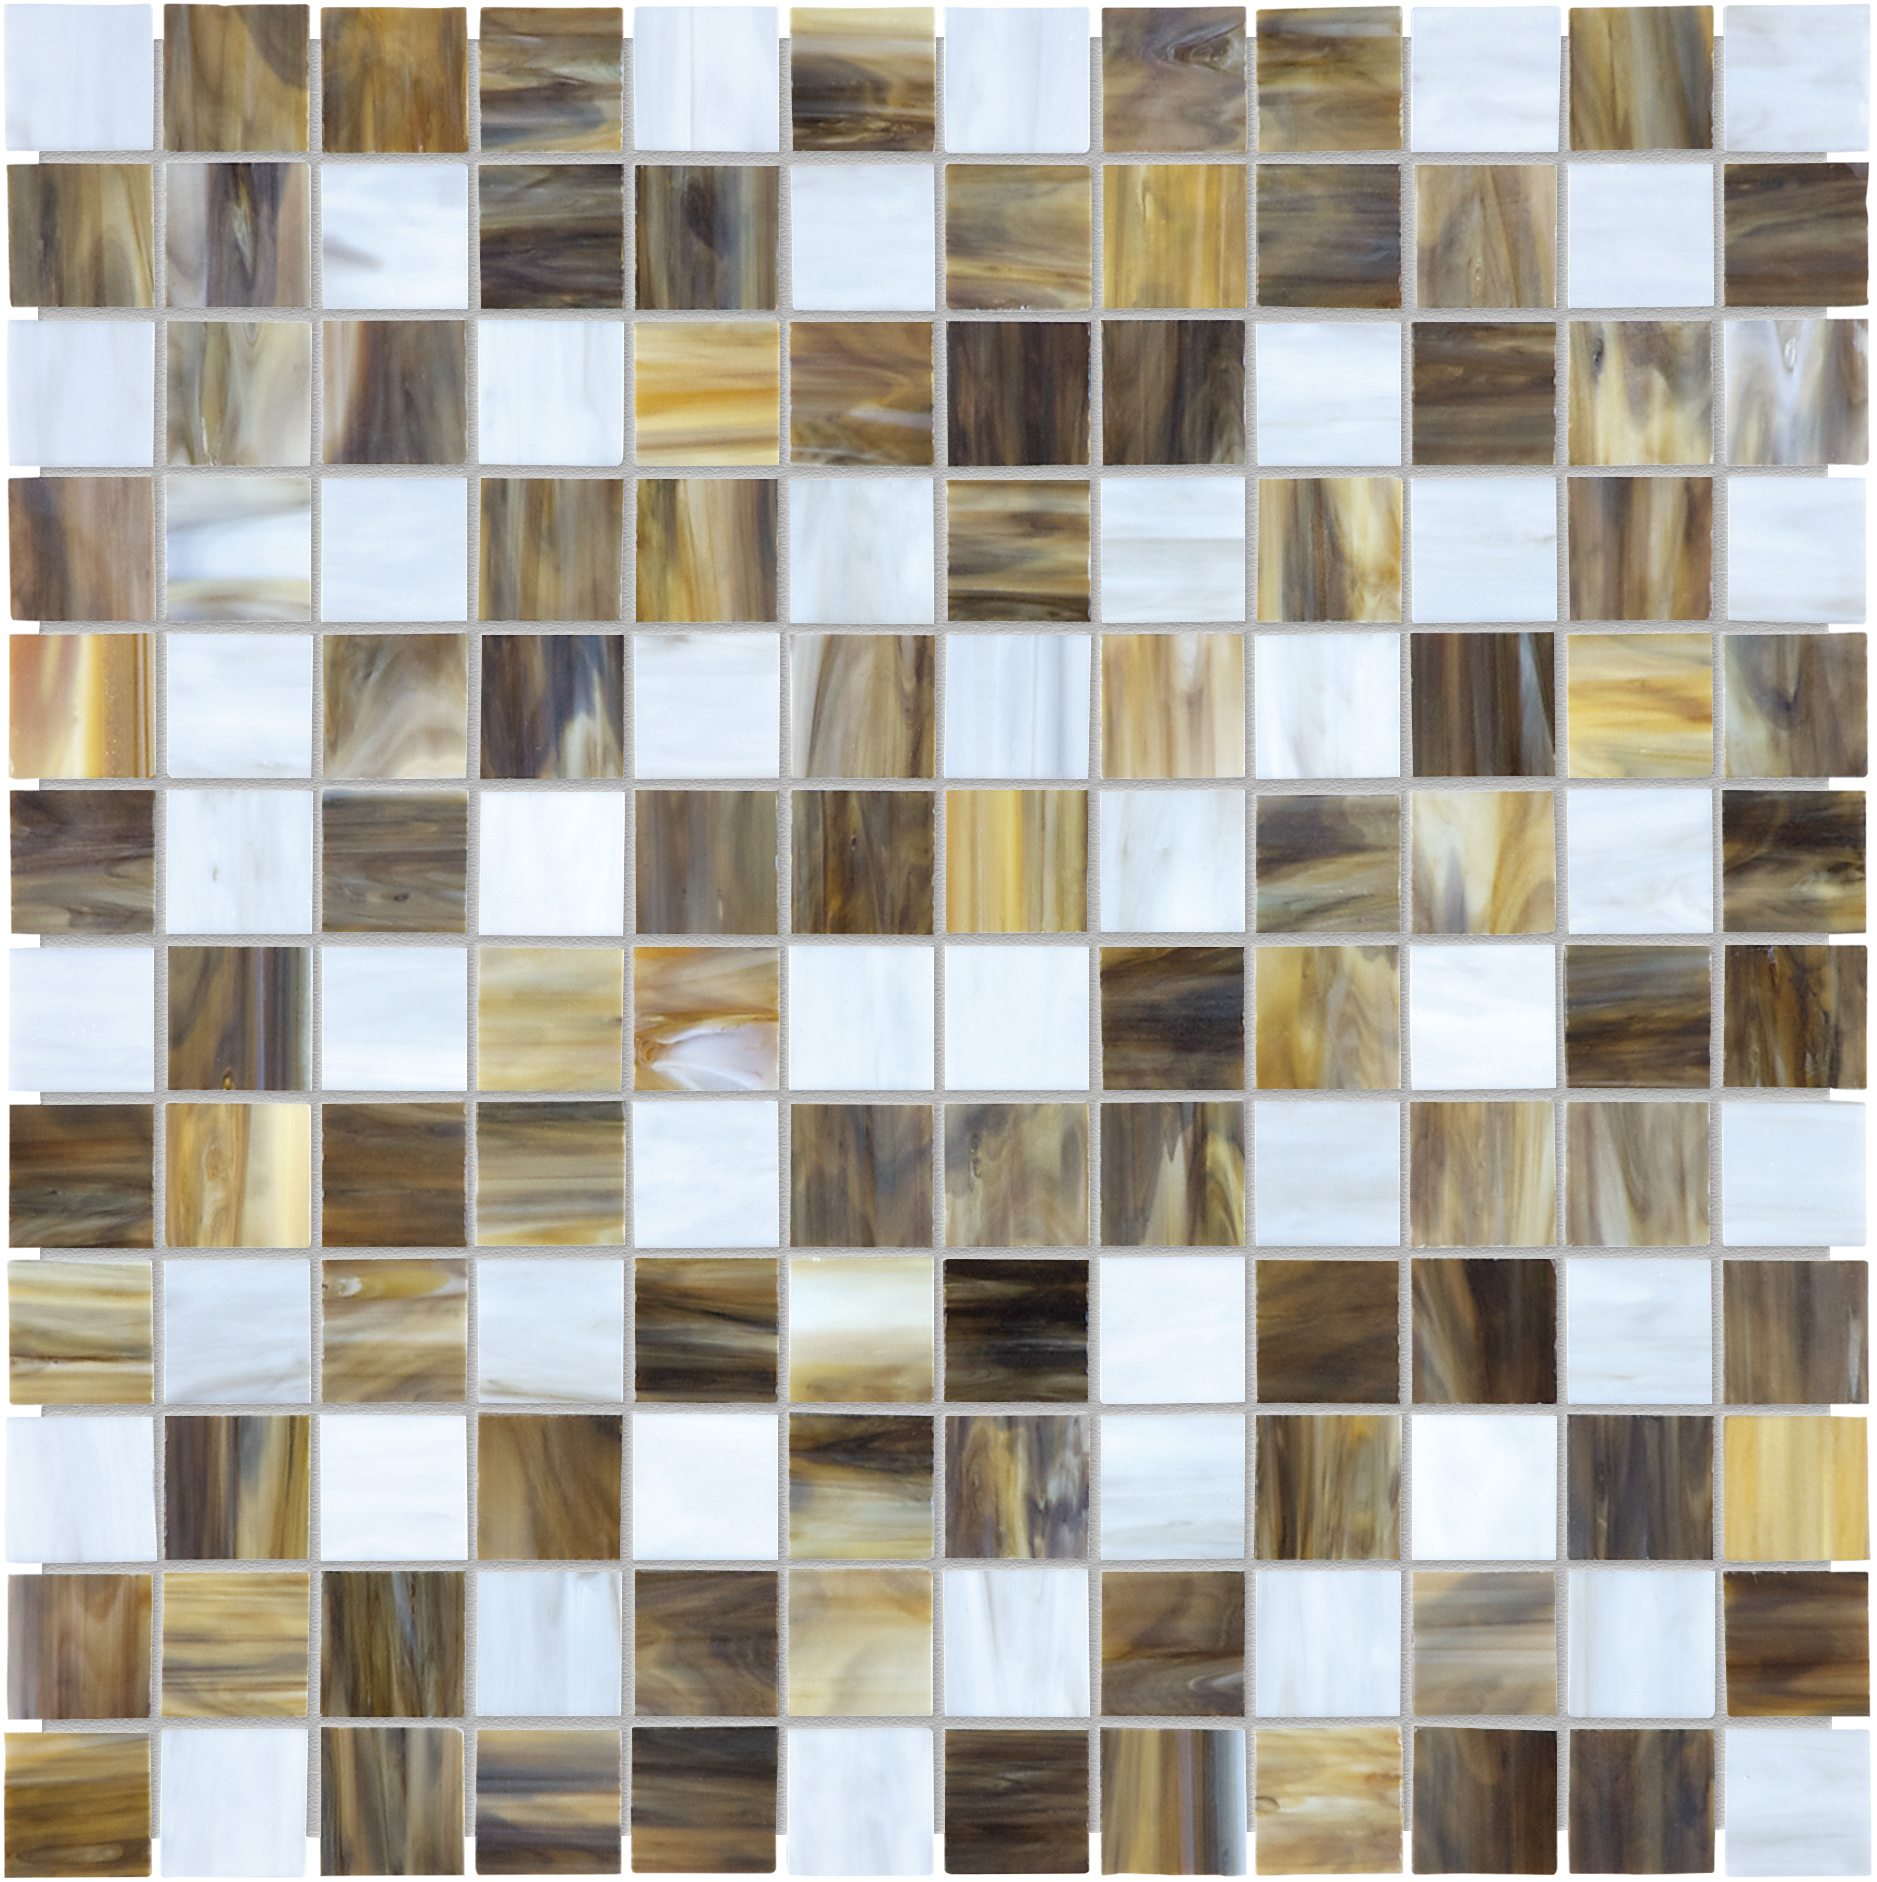 peperino straight stack 1x1-inch pattern fused glass mosaic from baroque anatolia collection distributed by surface group international glossy finish rounded edge mesh shape